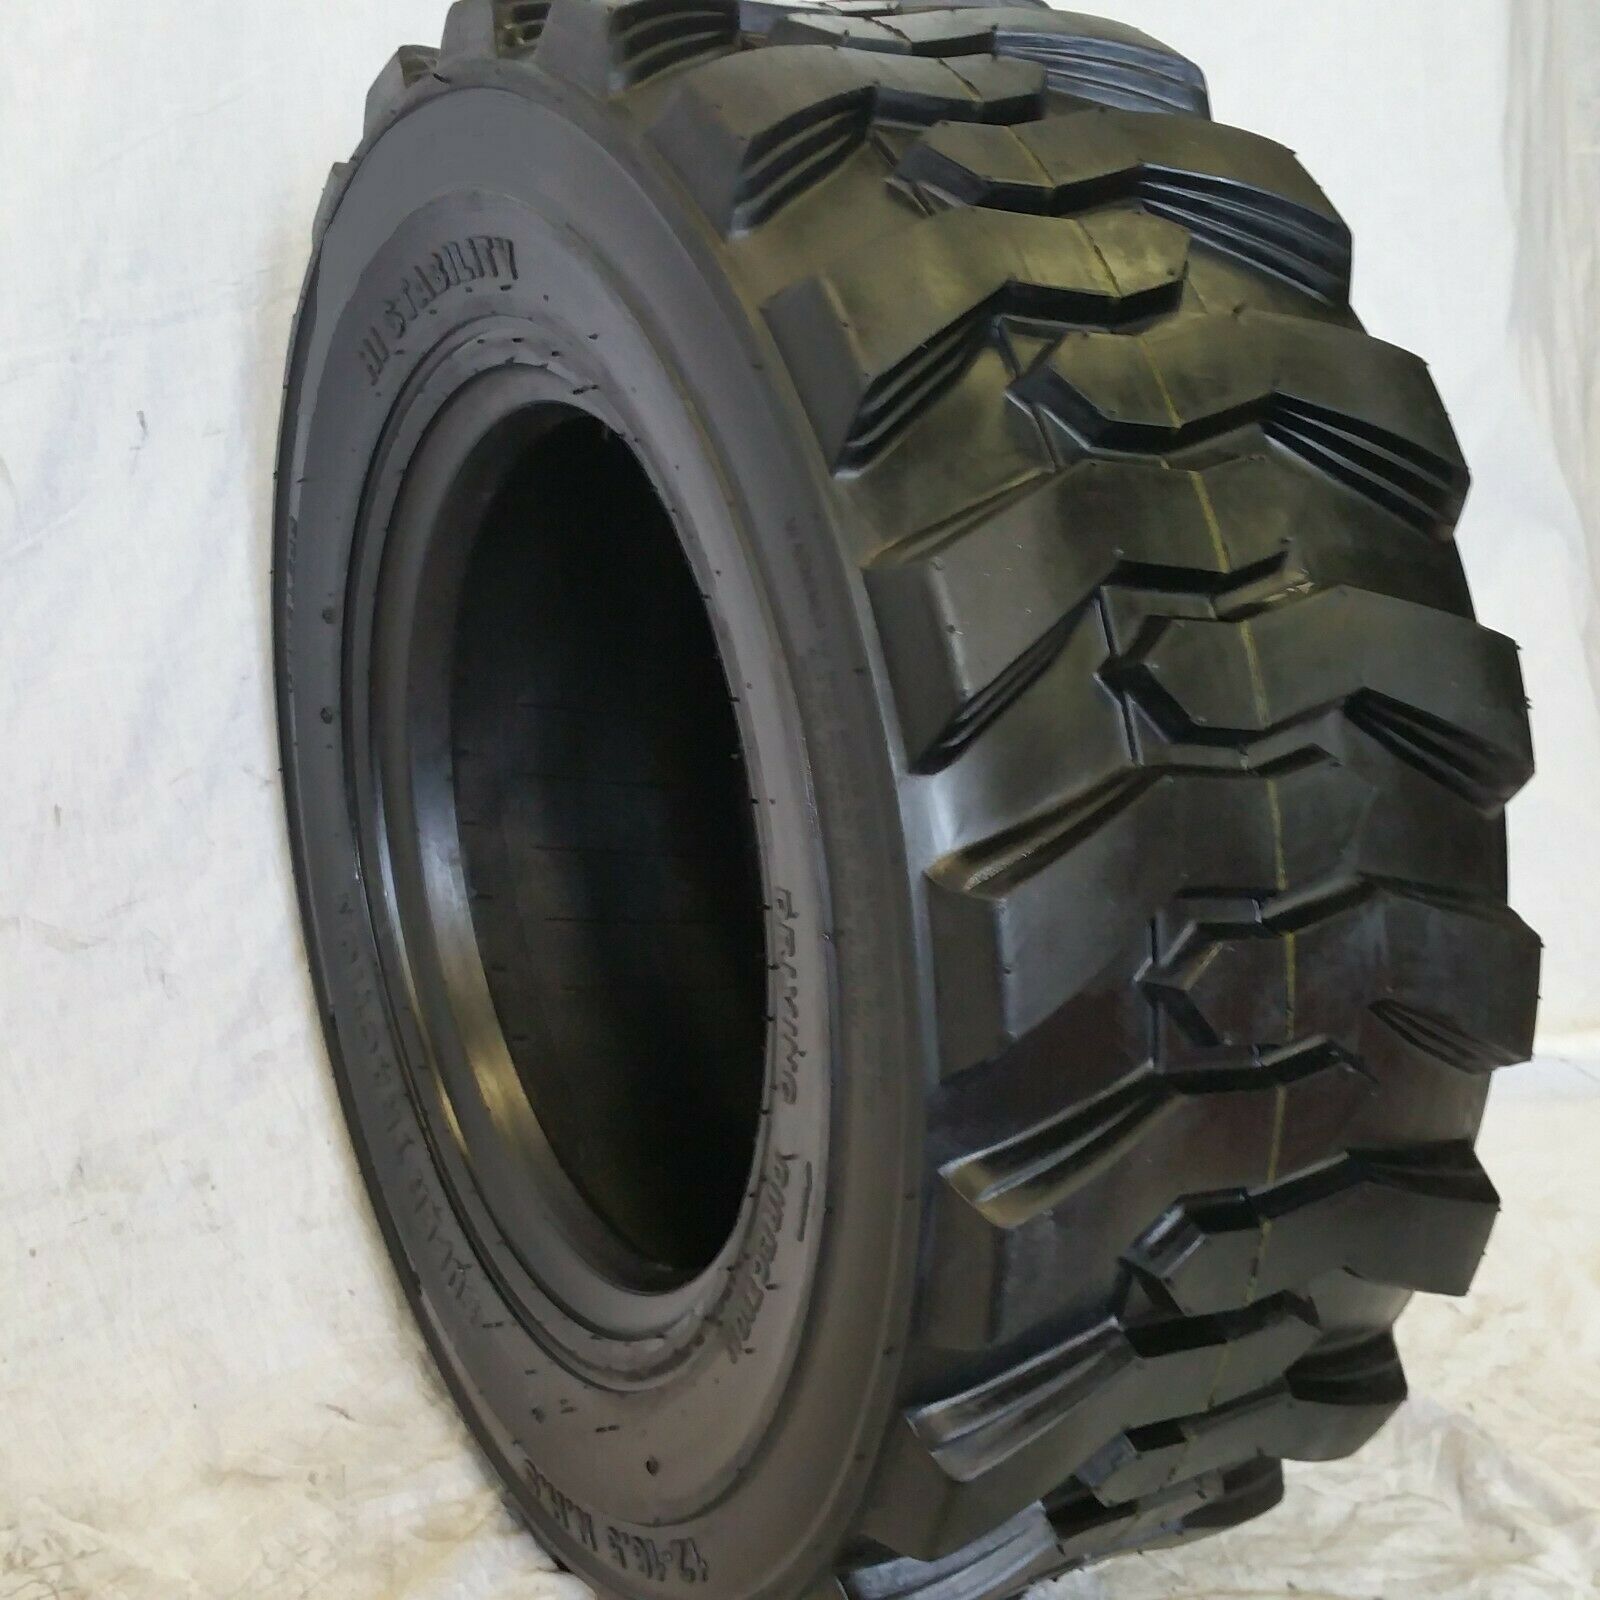 10-16.5, 10x16.5 (1-tire) 14 Ply Skid Steer Road Crew Sks Tires 10165